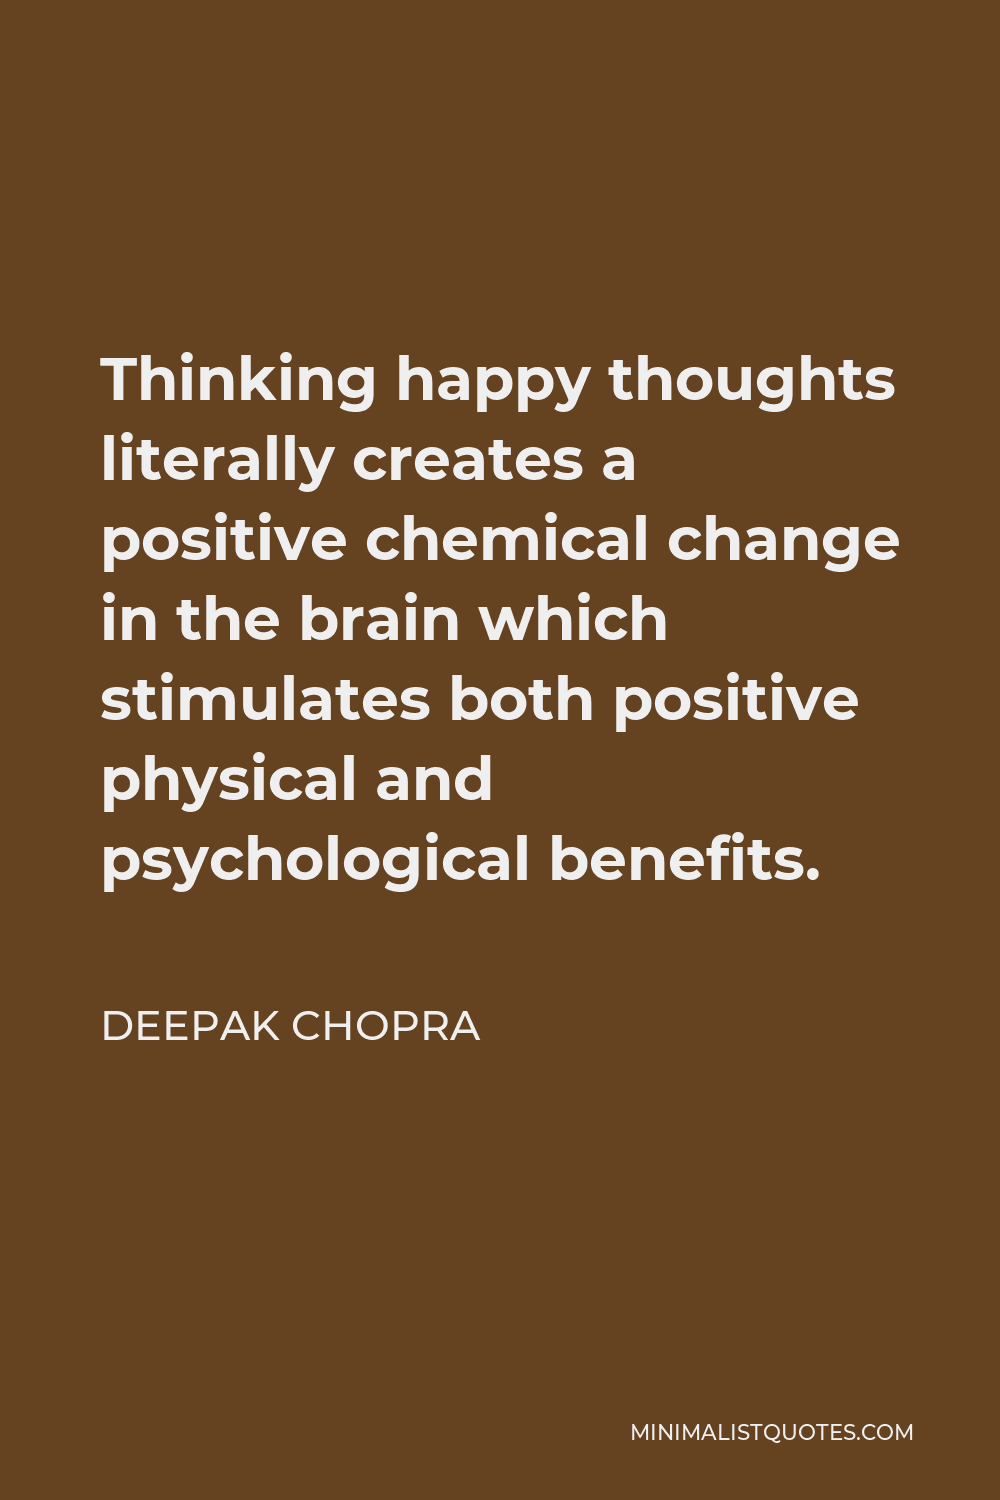 Deepak Chopra Quote: Thinking happy thoughts literally creates a positive  chemical change in the brain which stimulates both positive physical and  psychological benefits.